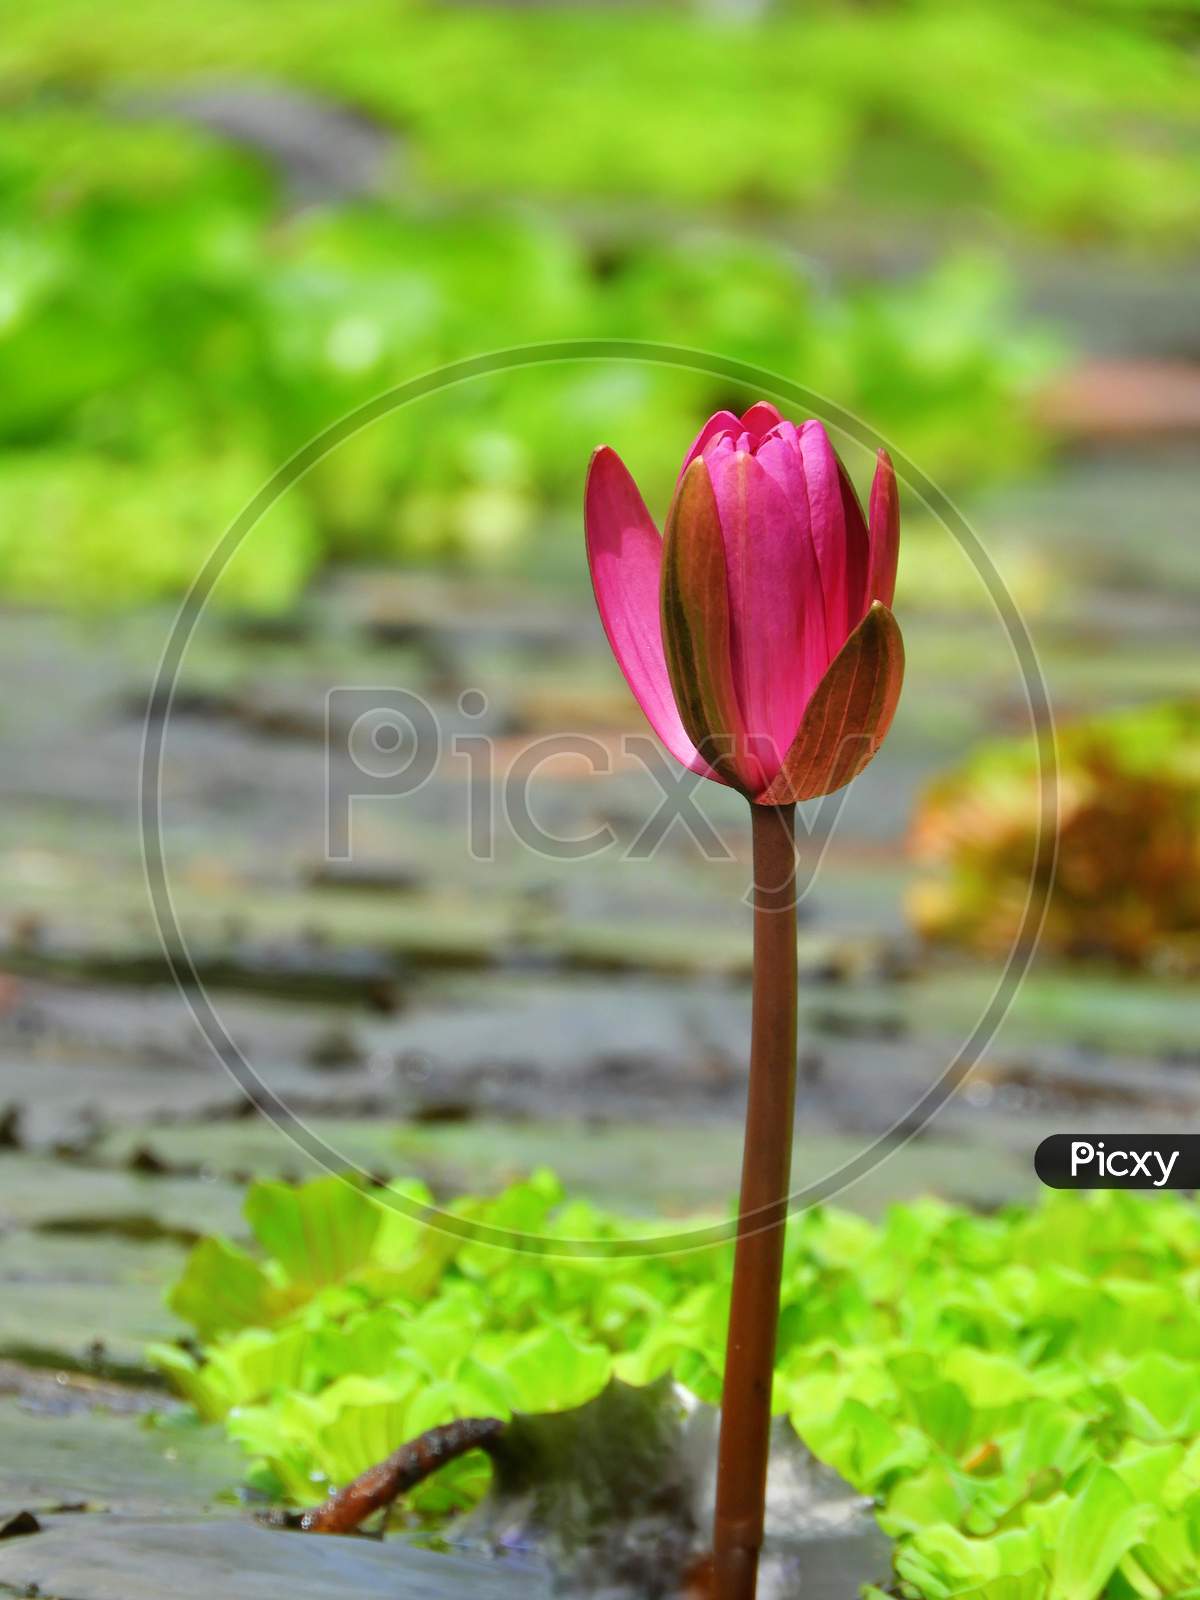 The water lily starts to bloom.